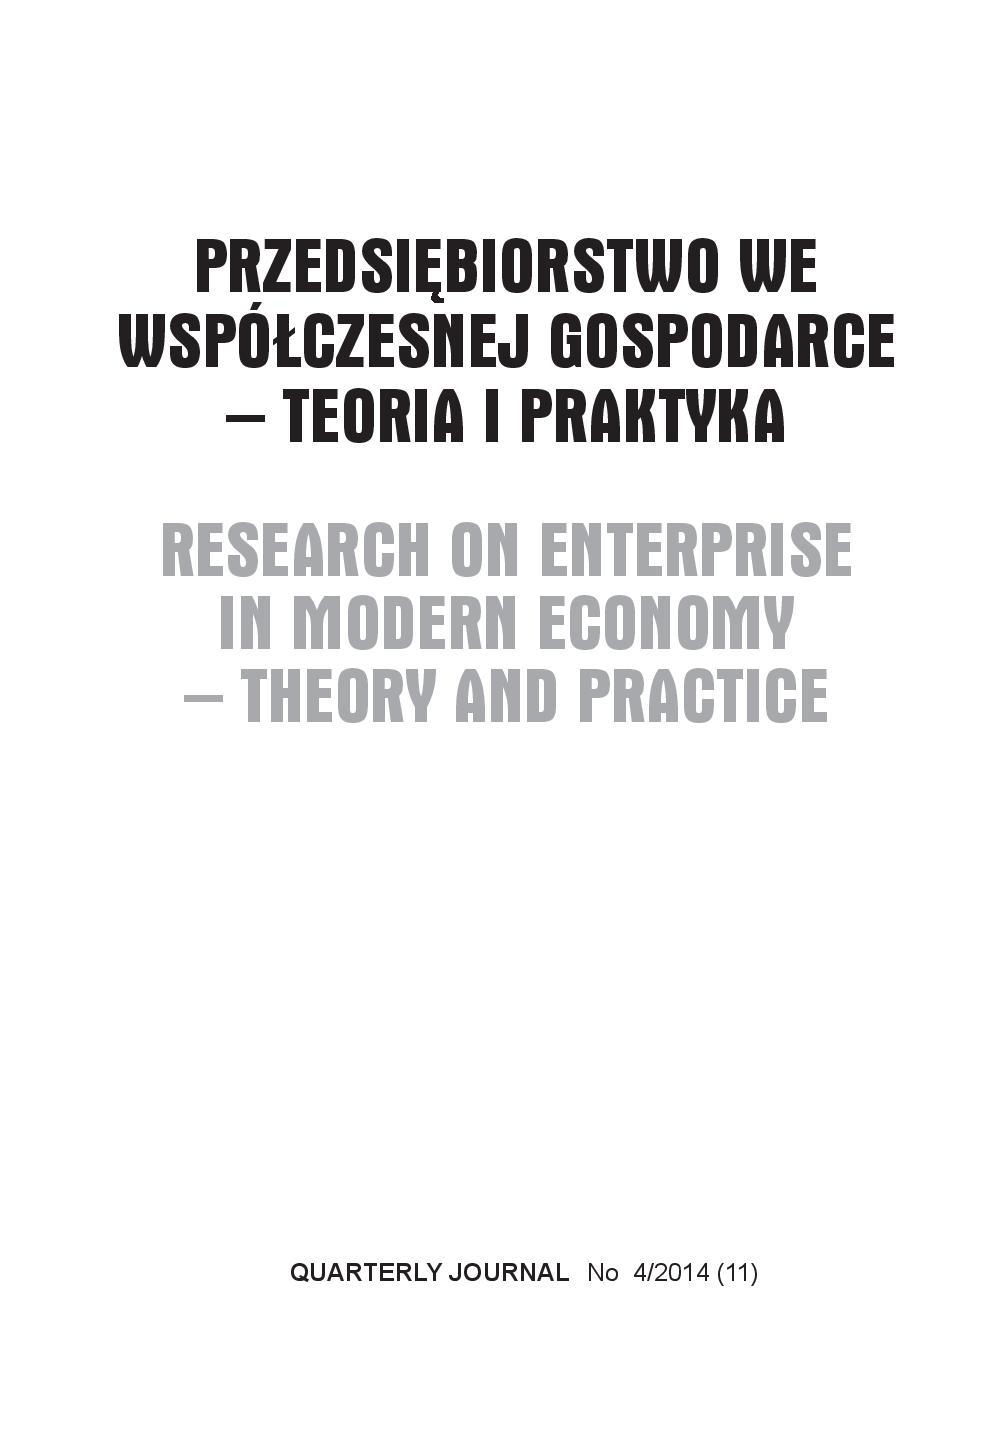 CONDITIONS OF DEVELOPMENT OF ENTERPRISES IN RURAL AND URBAN RURAL AREAS ŚWIĘTOKRZYSKIE VOIVODSHIP Cover Image